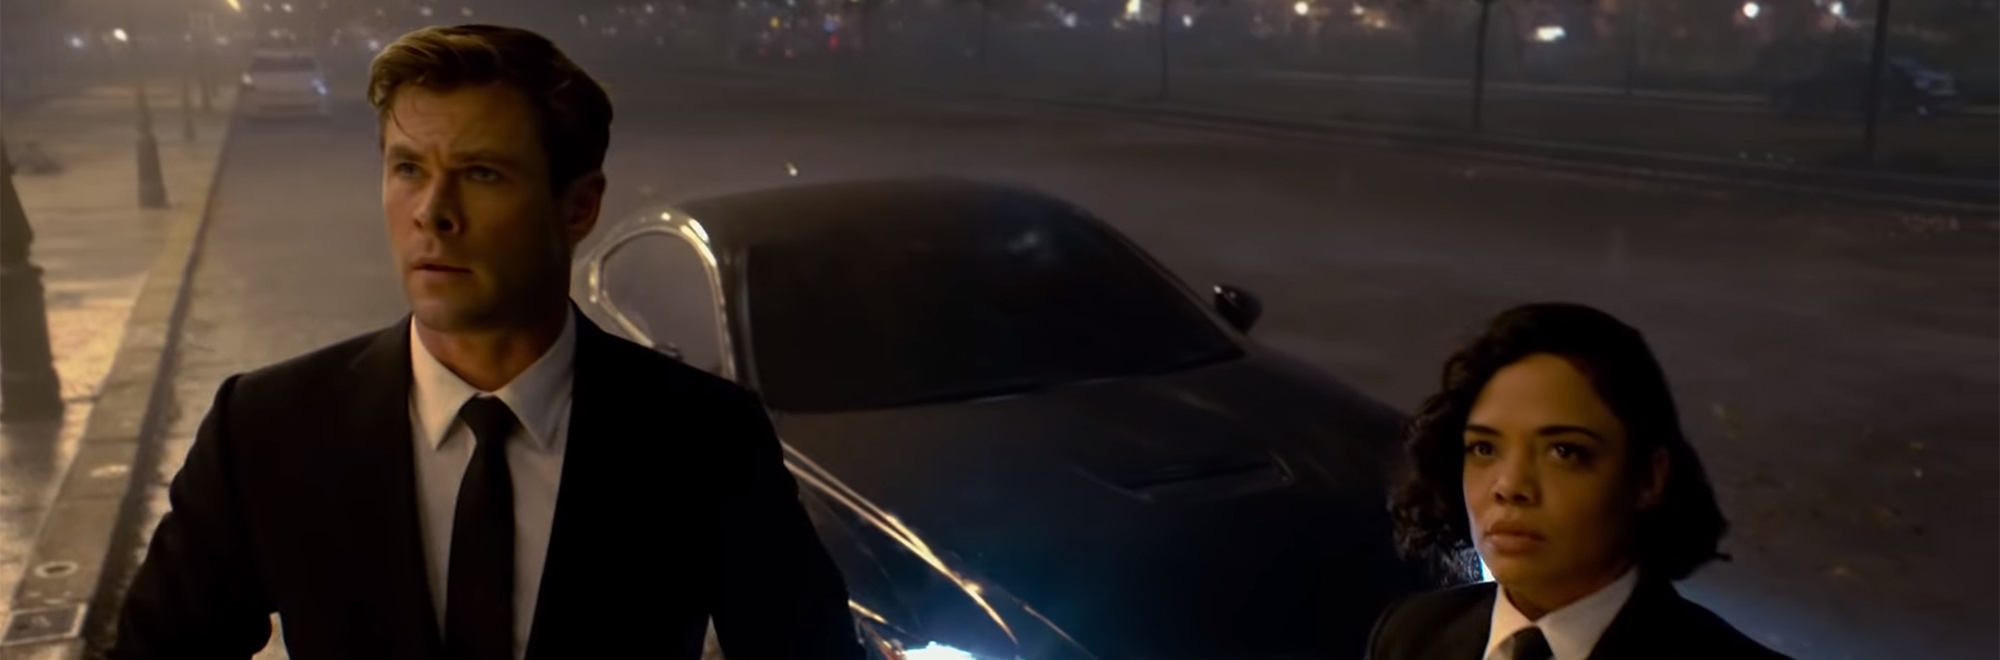 Why Lexus Men in Black-inspired ads fail to inspire